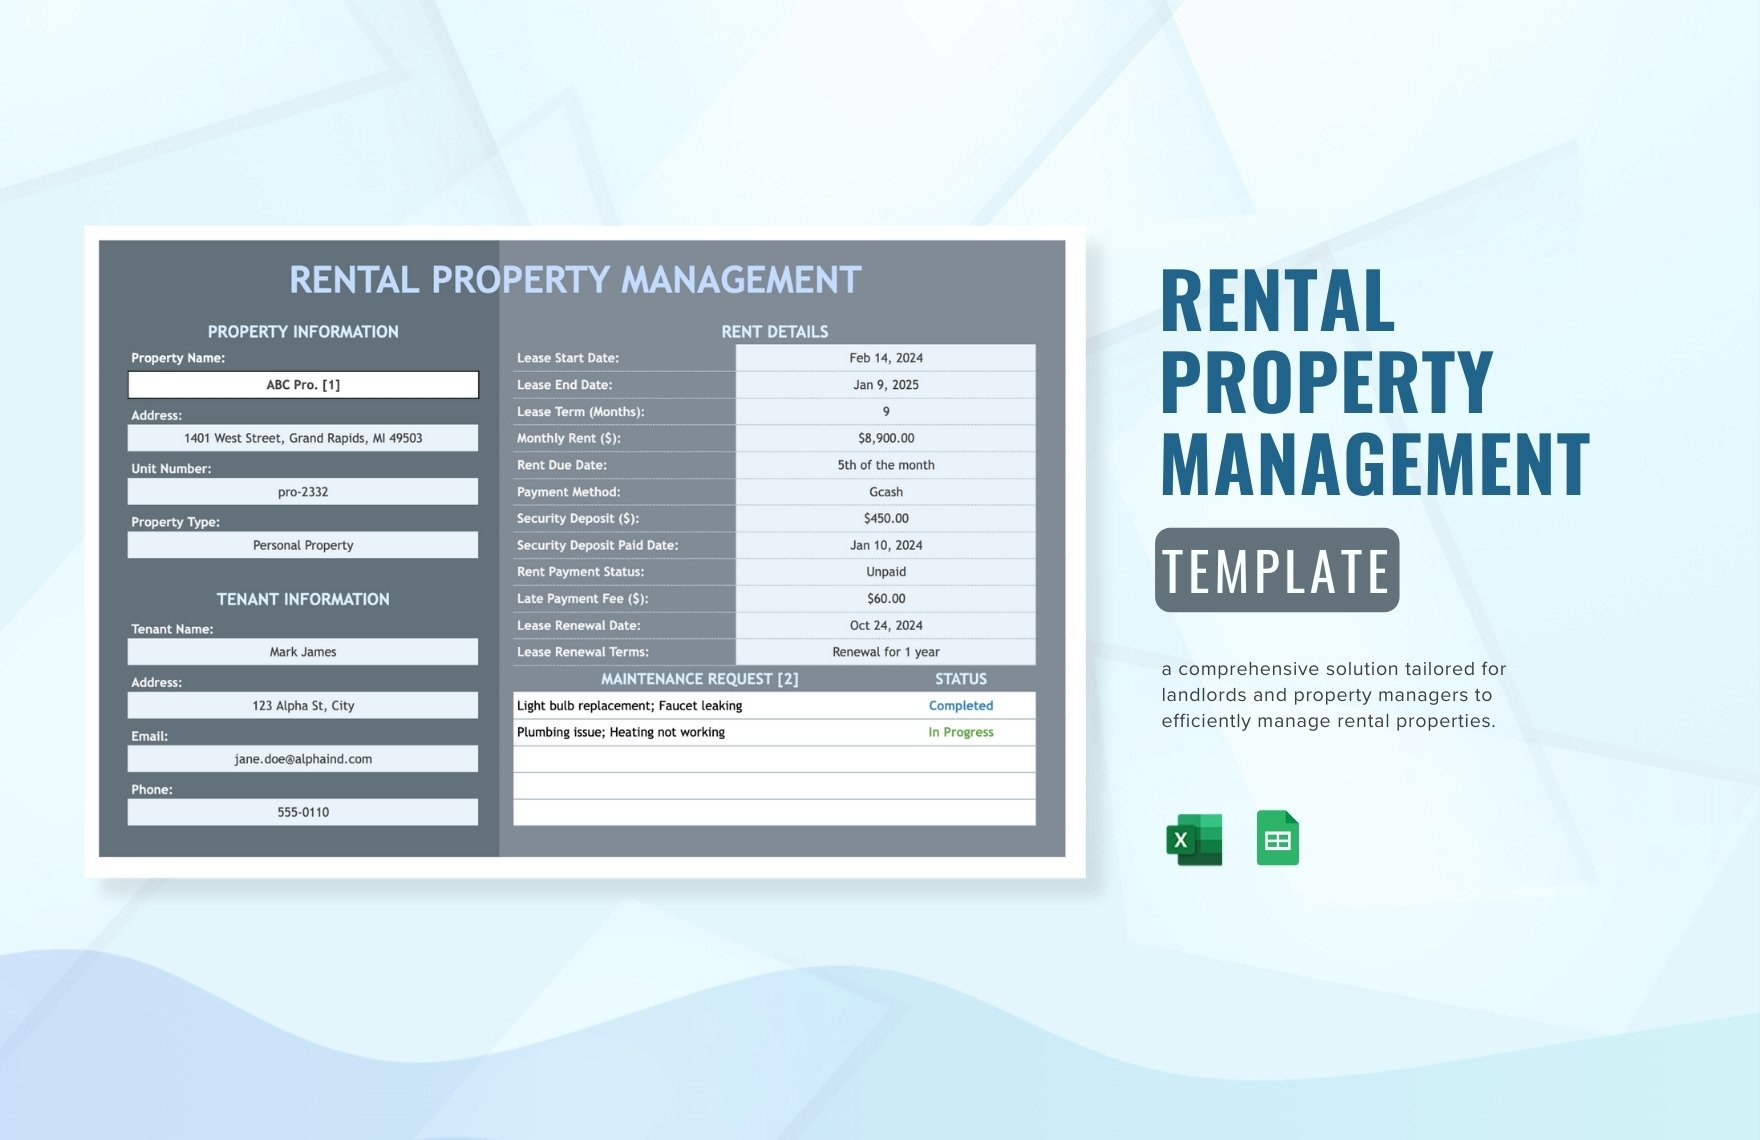 Rental Property Management Template in Excel, Google Sheets